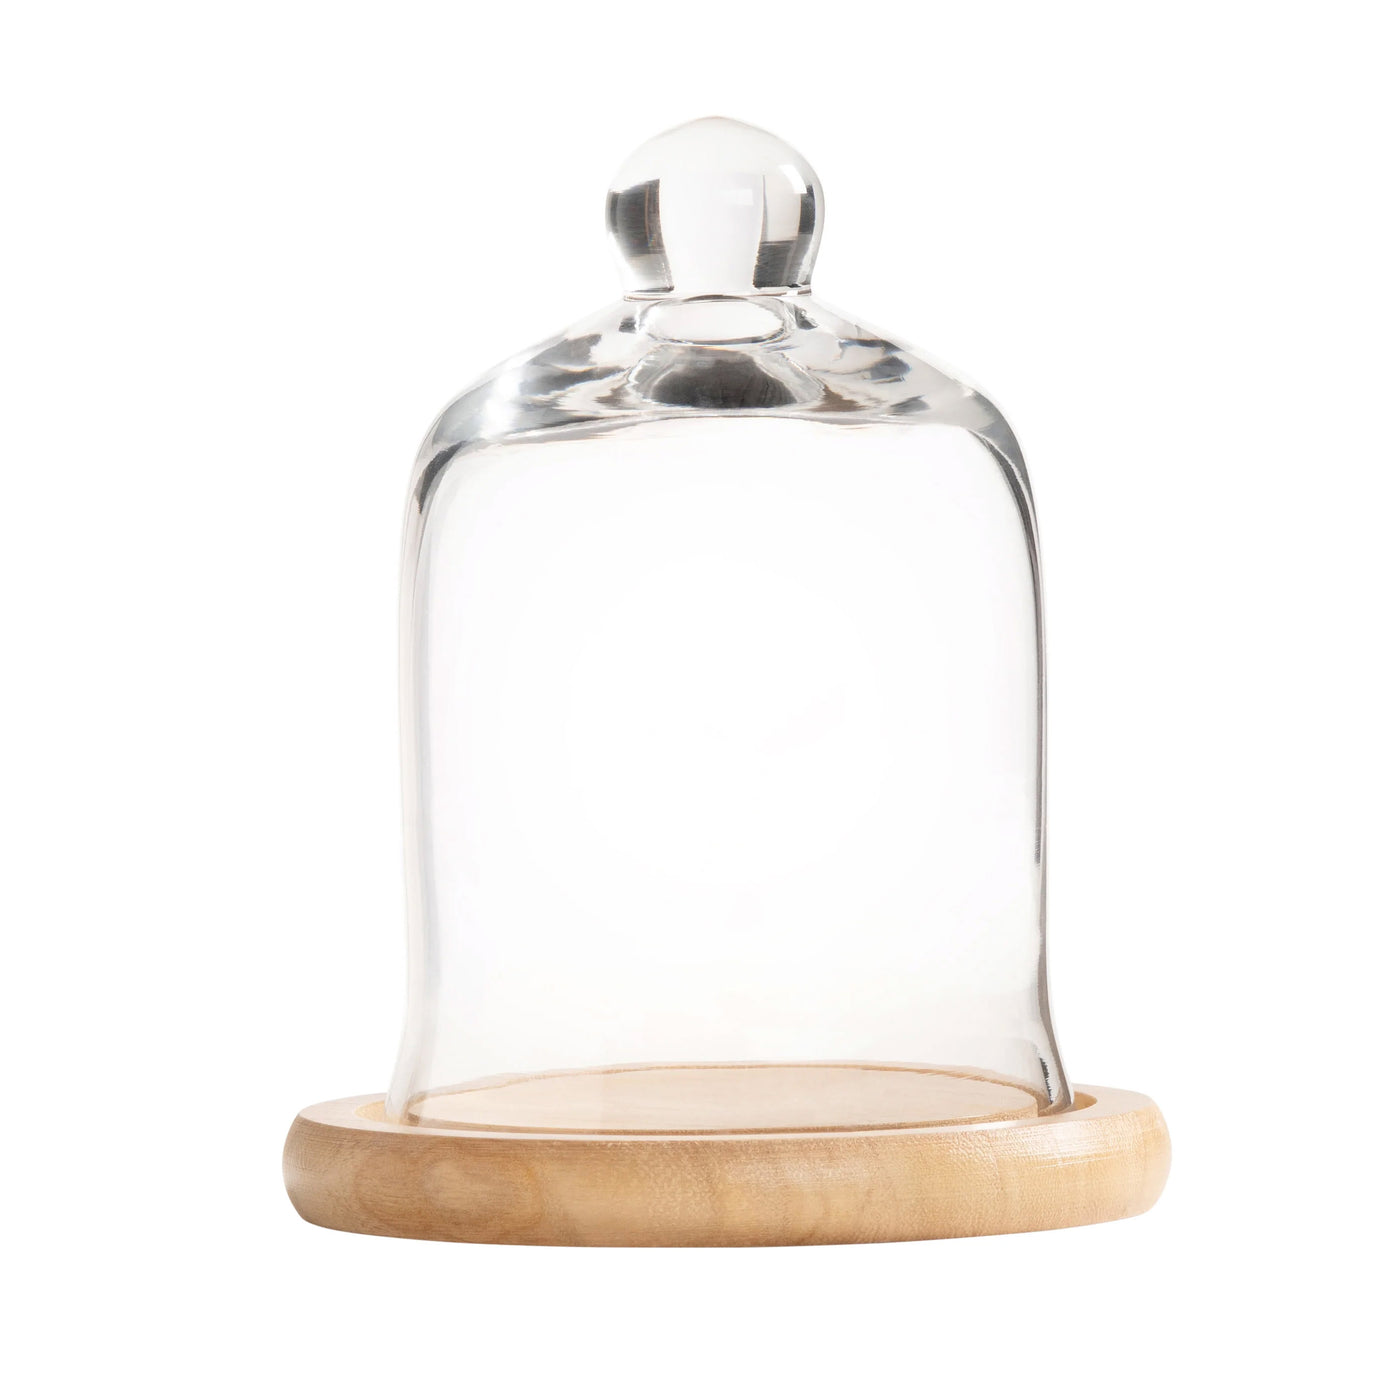 Glass Candle Cloche with Wooden Base